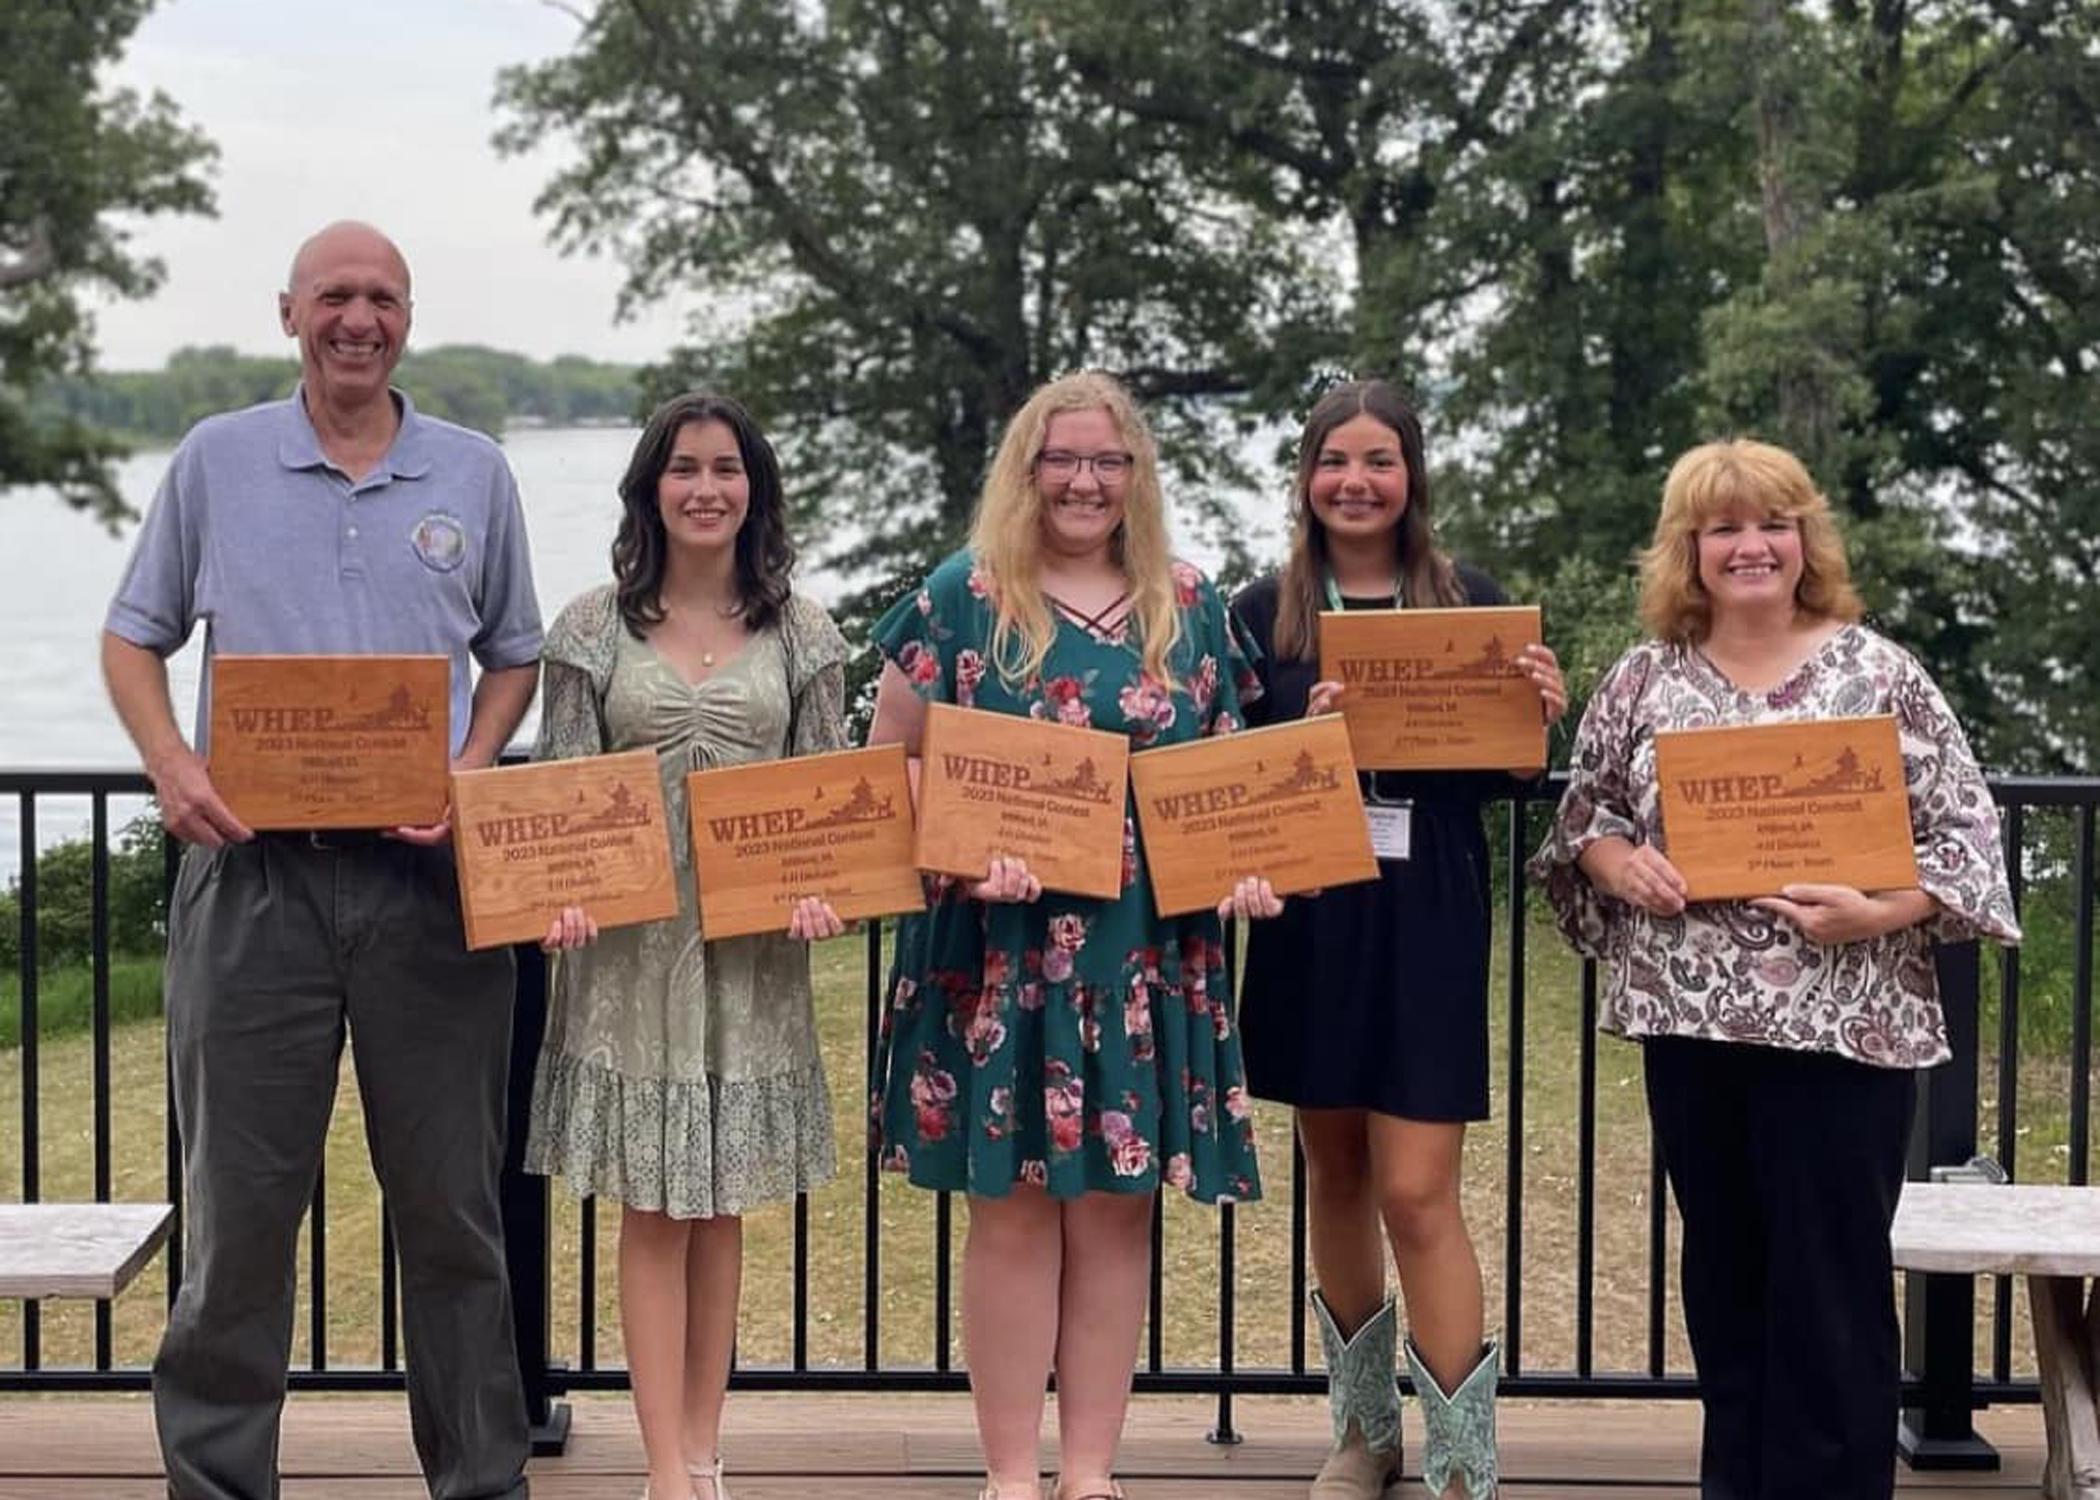 Wayne County, Mississippi 4-H’ers display their first place award plaques earned at the National Wildlife Habitat Education Program contest.